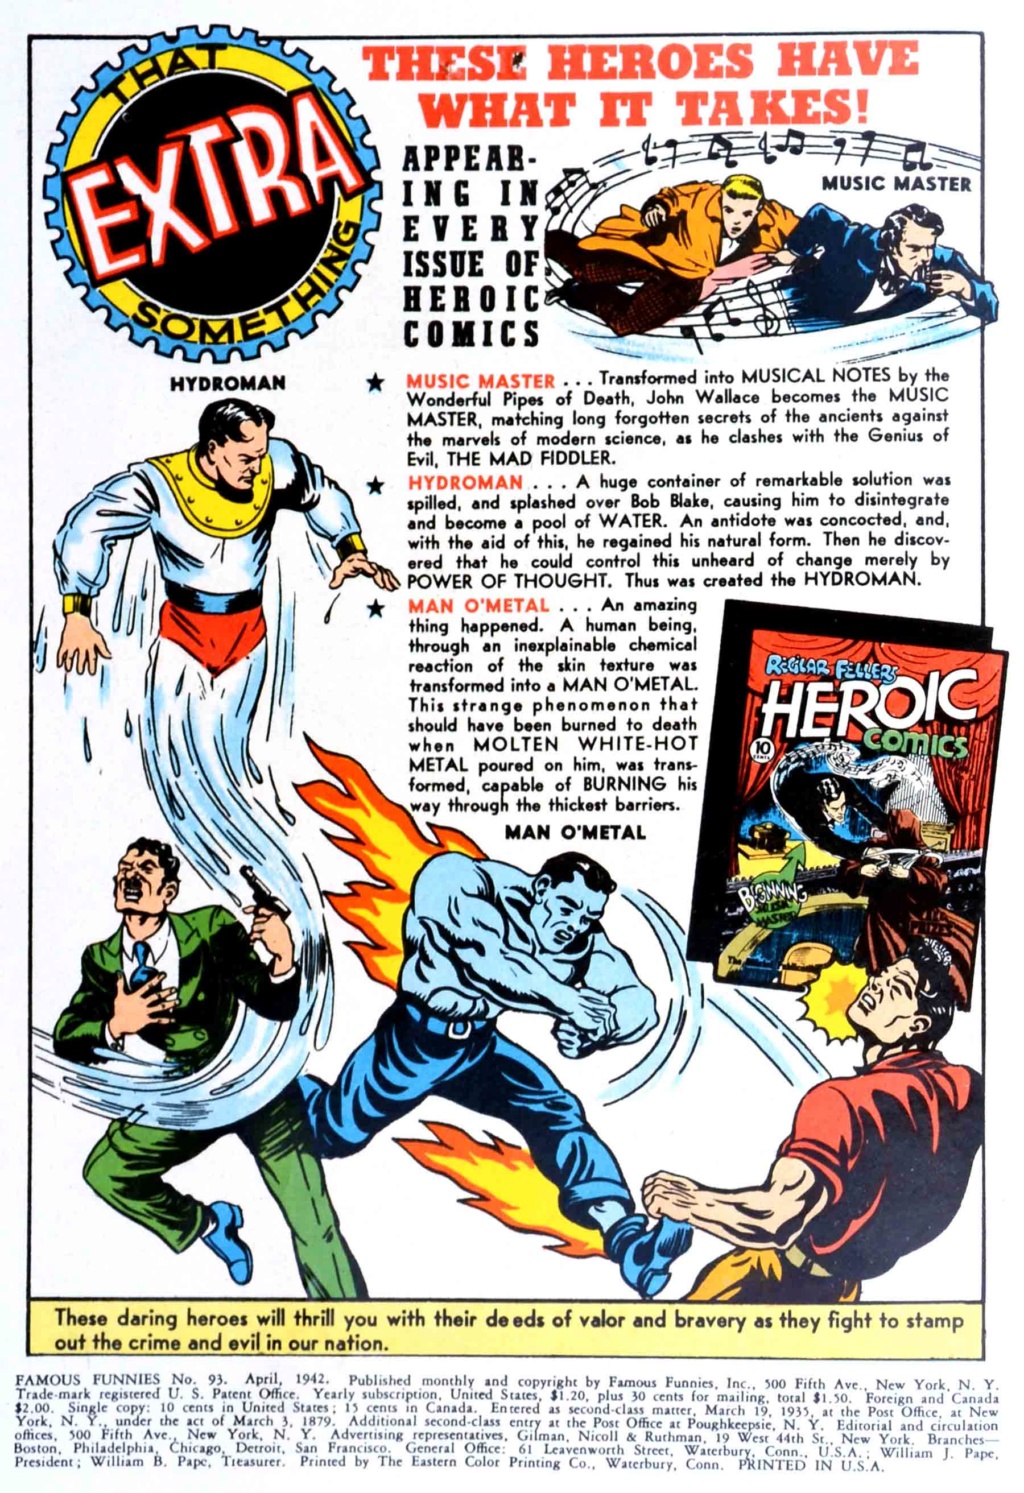 Golden Age Heroes and Villains not magical - Page 2 Heroic10